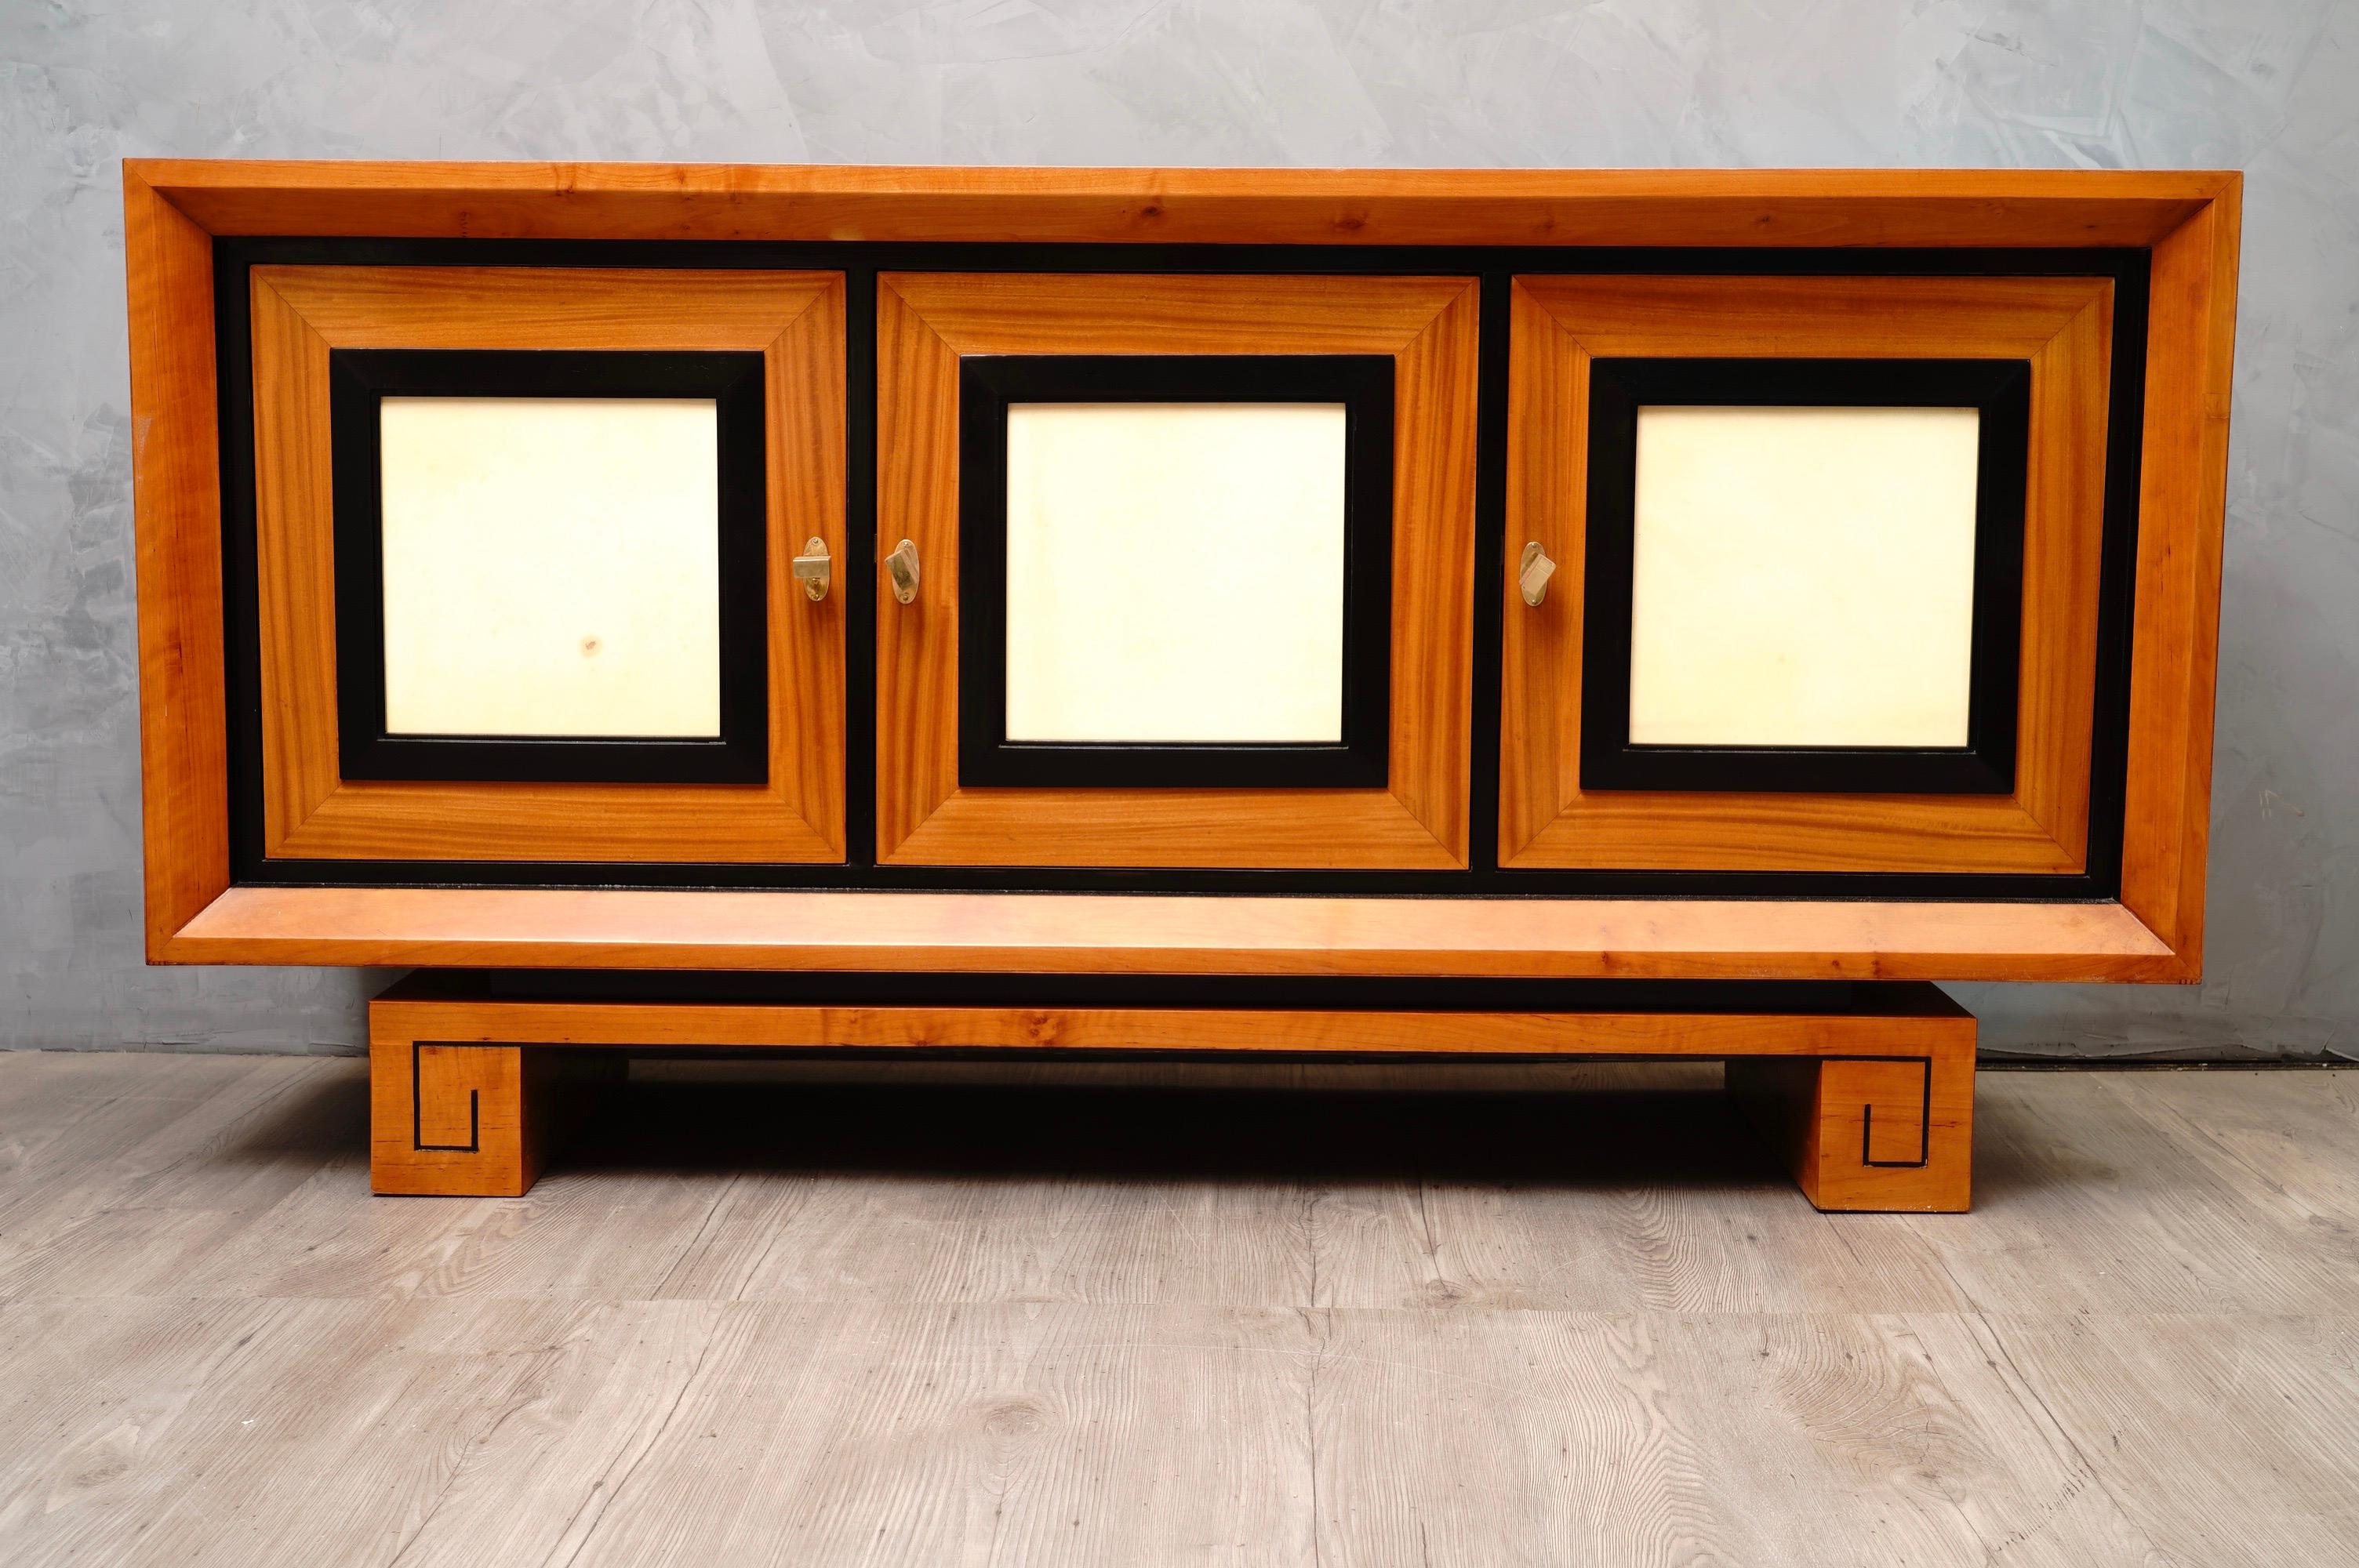 Very elegant appearance and velvety veneer, for a refined Art Deco sideboard; also due to the use of Fine materials.

Body all veneered in satinwood wood. On the front there is a frame cut at 45 °, and then a border all lacquered in black shellac